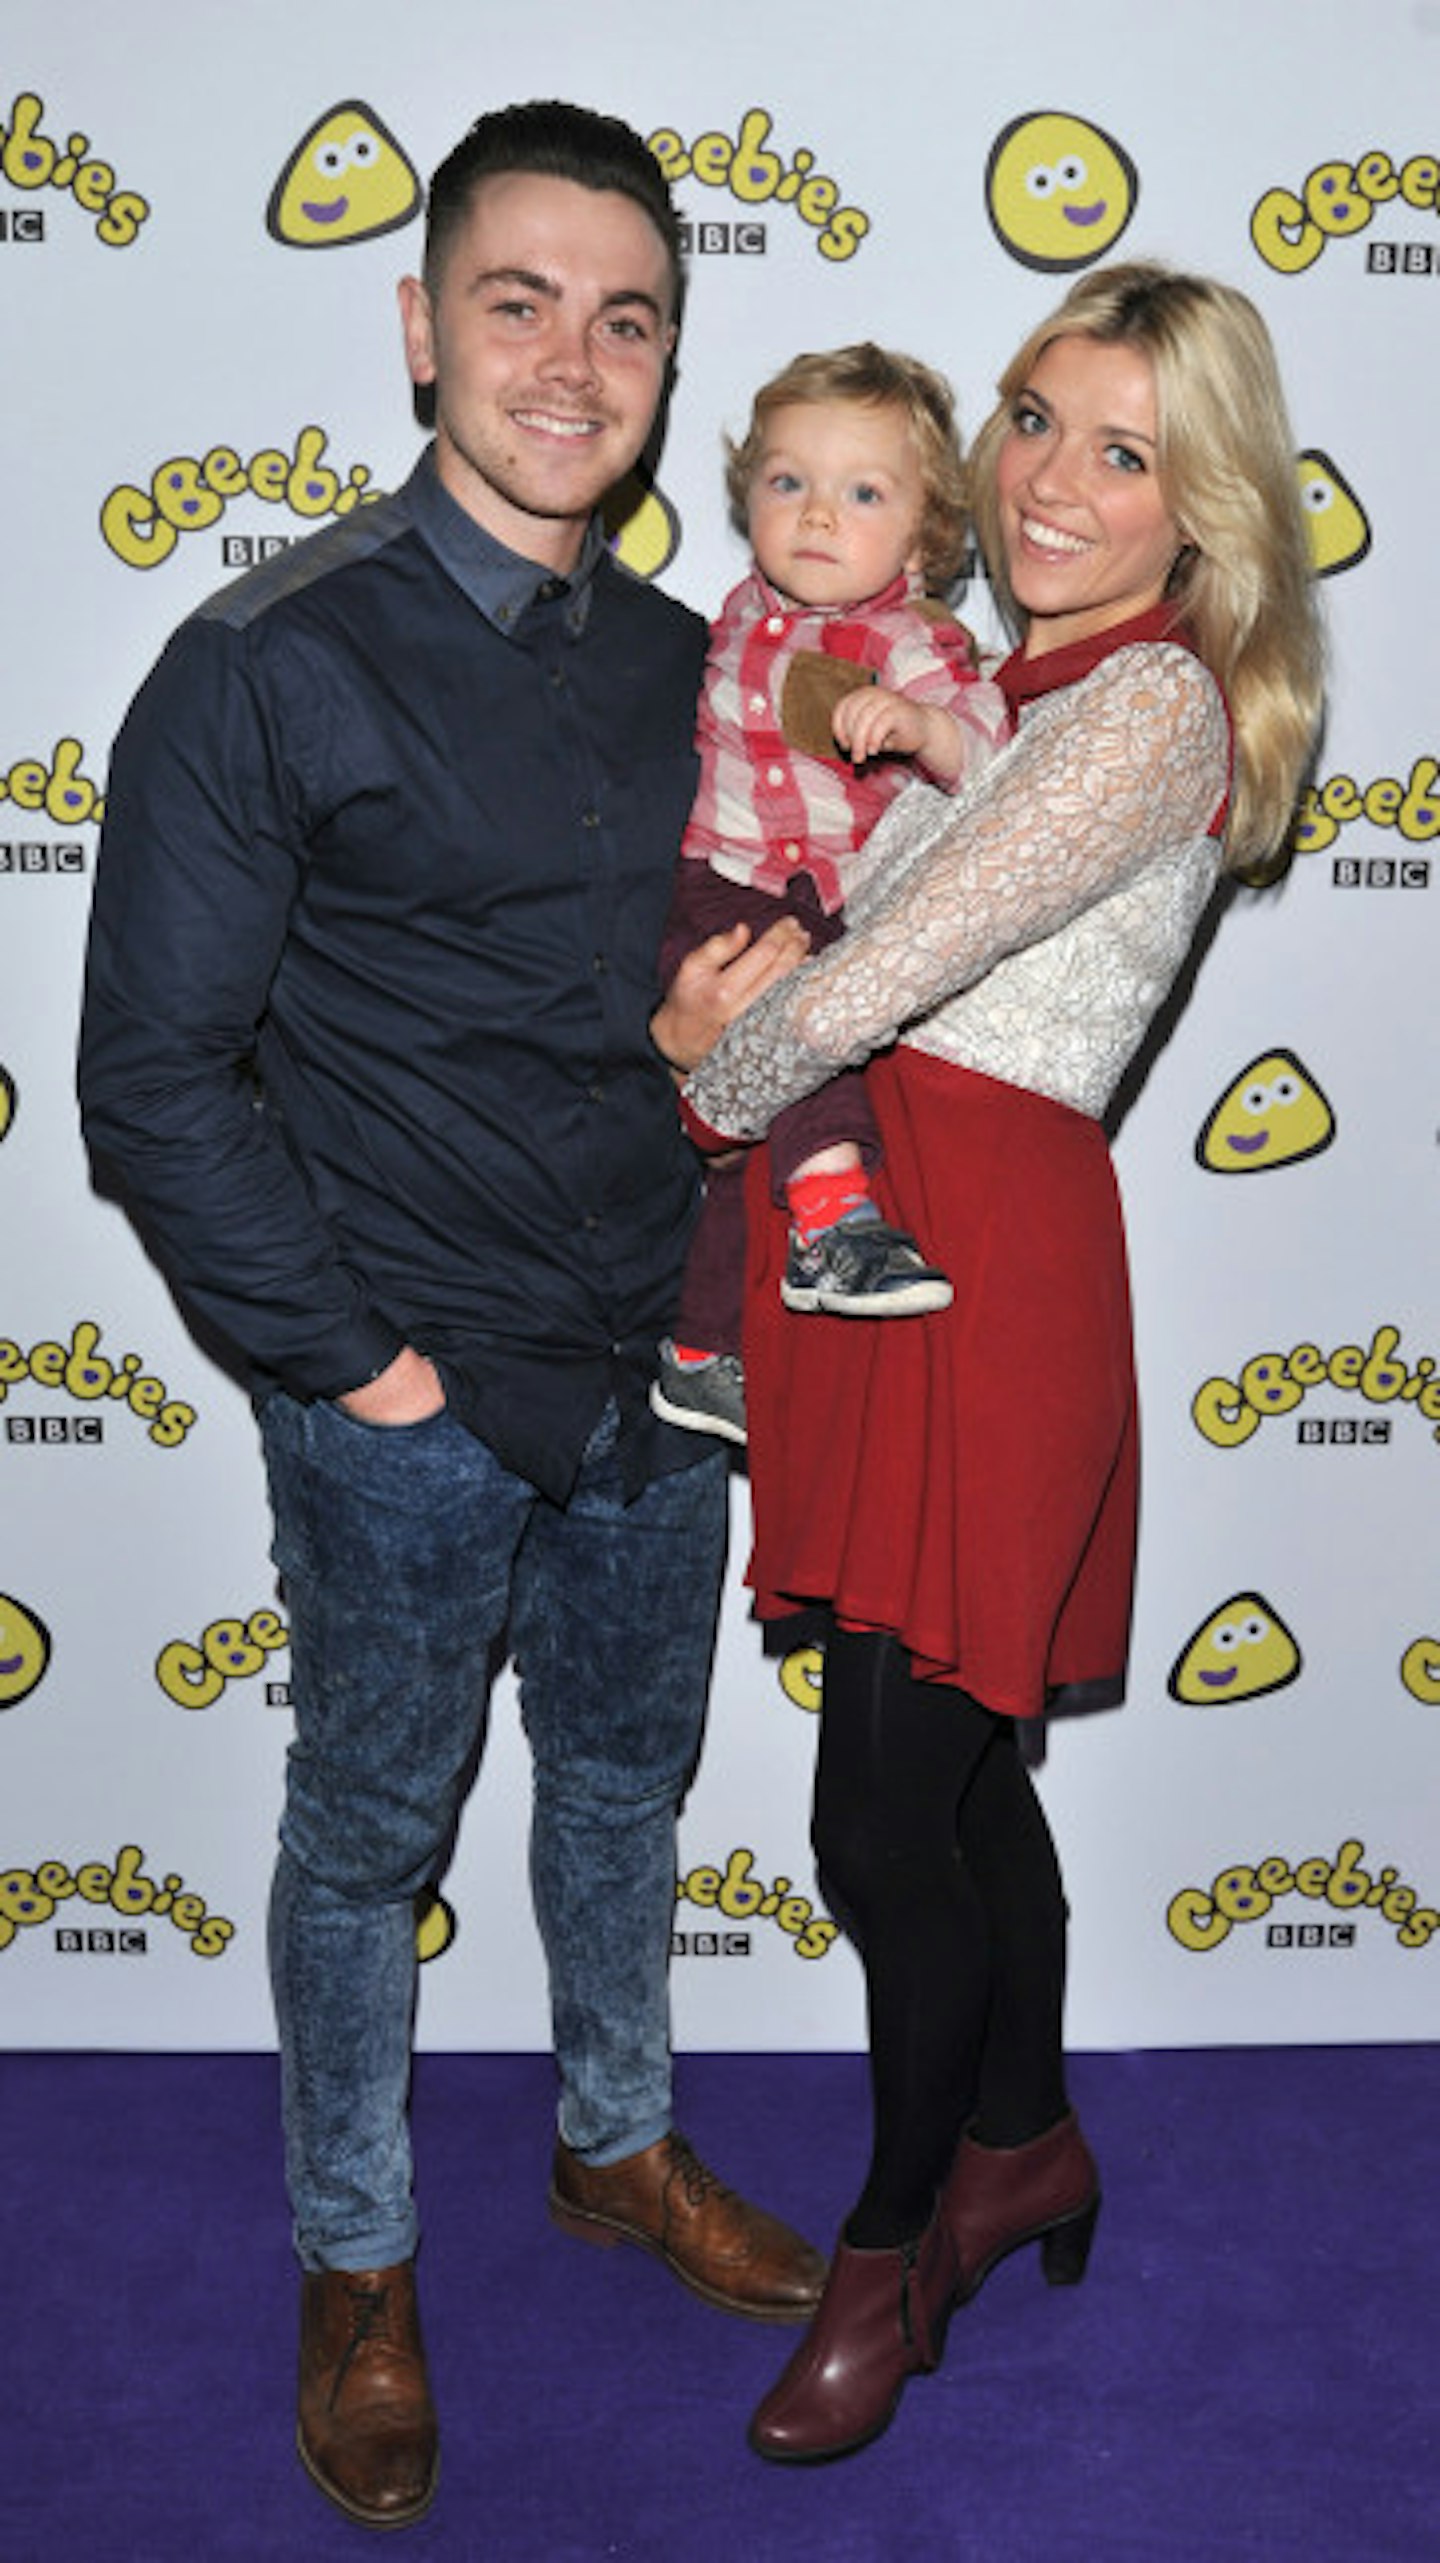 Ray Quinn, Emma Stephens, and their son, Harry.